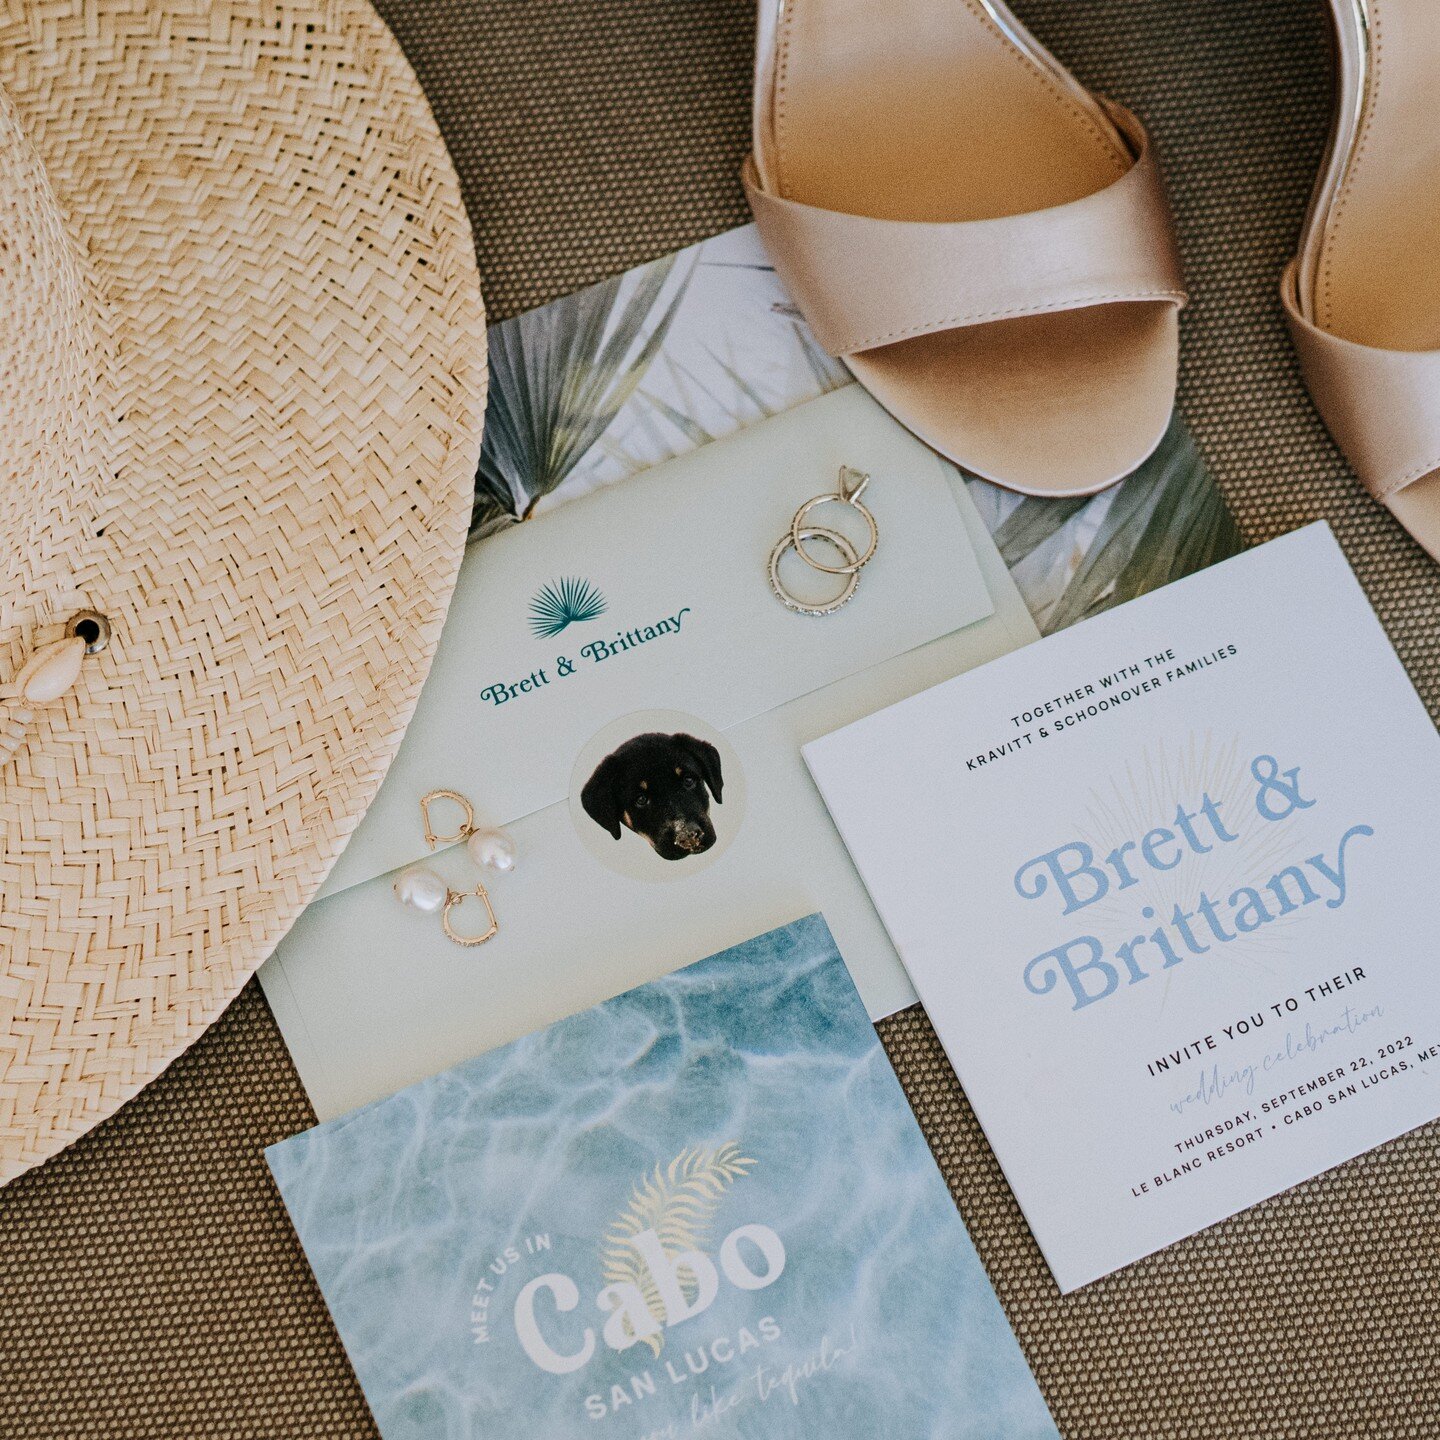 Dreaming of Cabo on this cold winter day... cheers to Britt &amp; Brett and a wedding day filled with fun, laughter (and lots of tequila)!